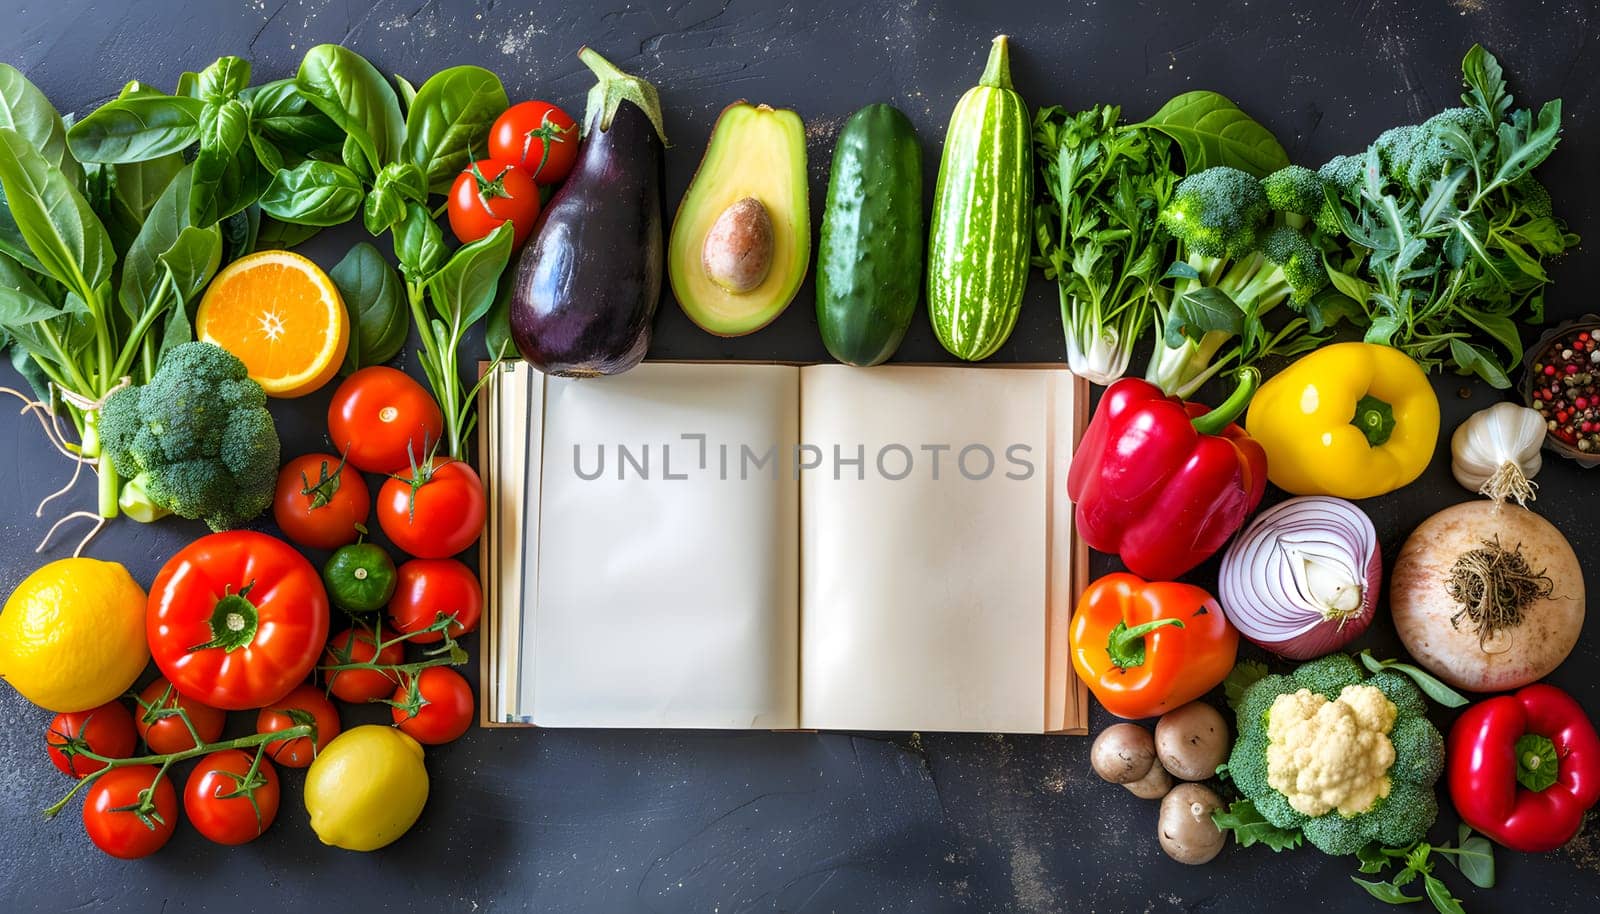 A variety of fruits and vegetables, including green bell peppers, are displayed around a book on a table. They are essential ingredients for wholesome recipes and are part of a balanced diet